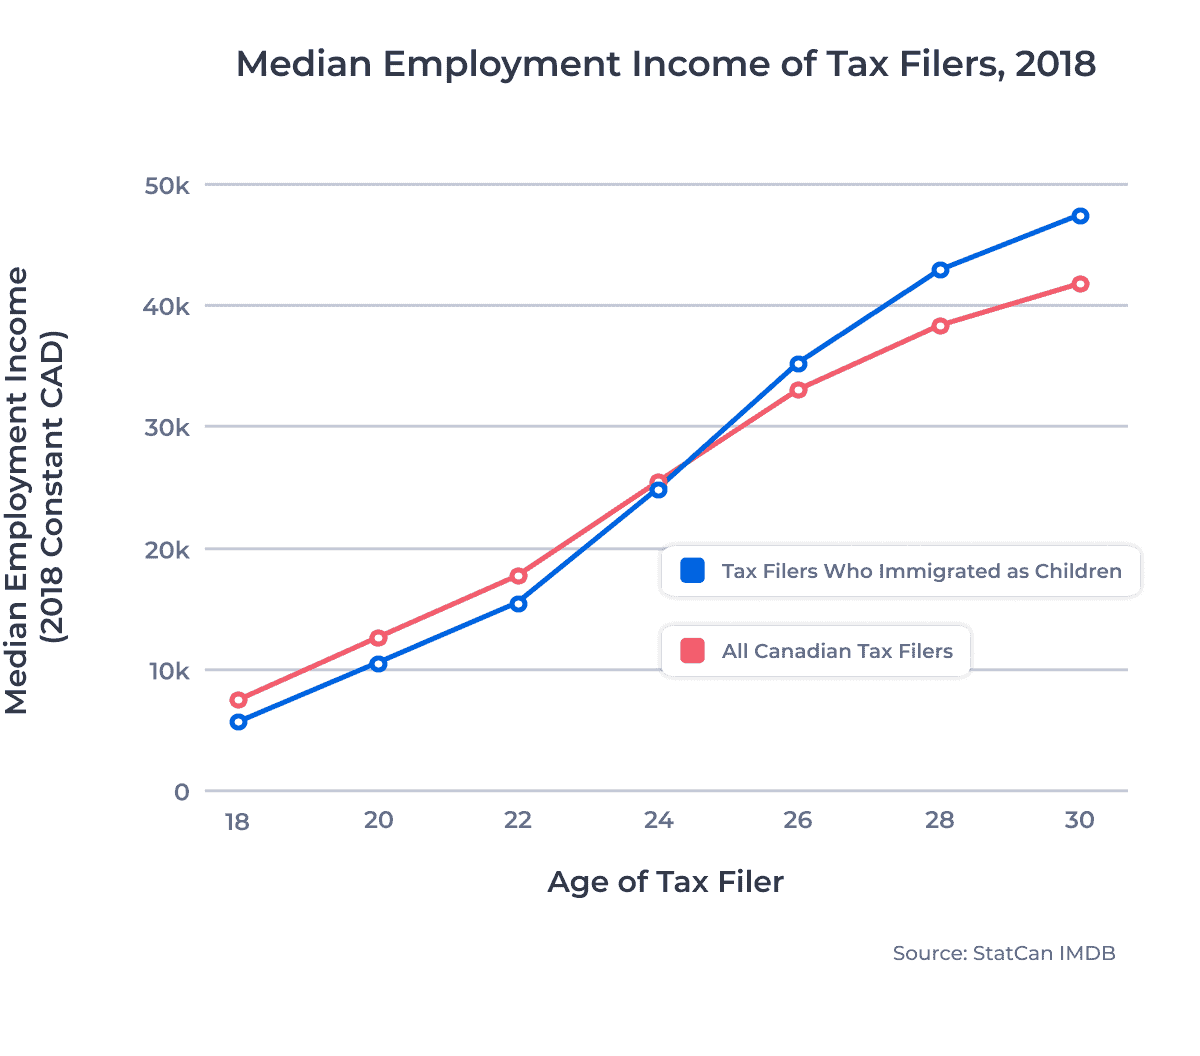 Median Employment Income of Tax Filers, 2018